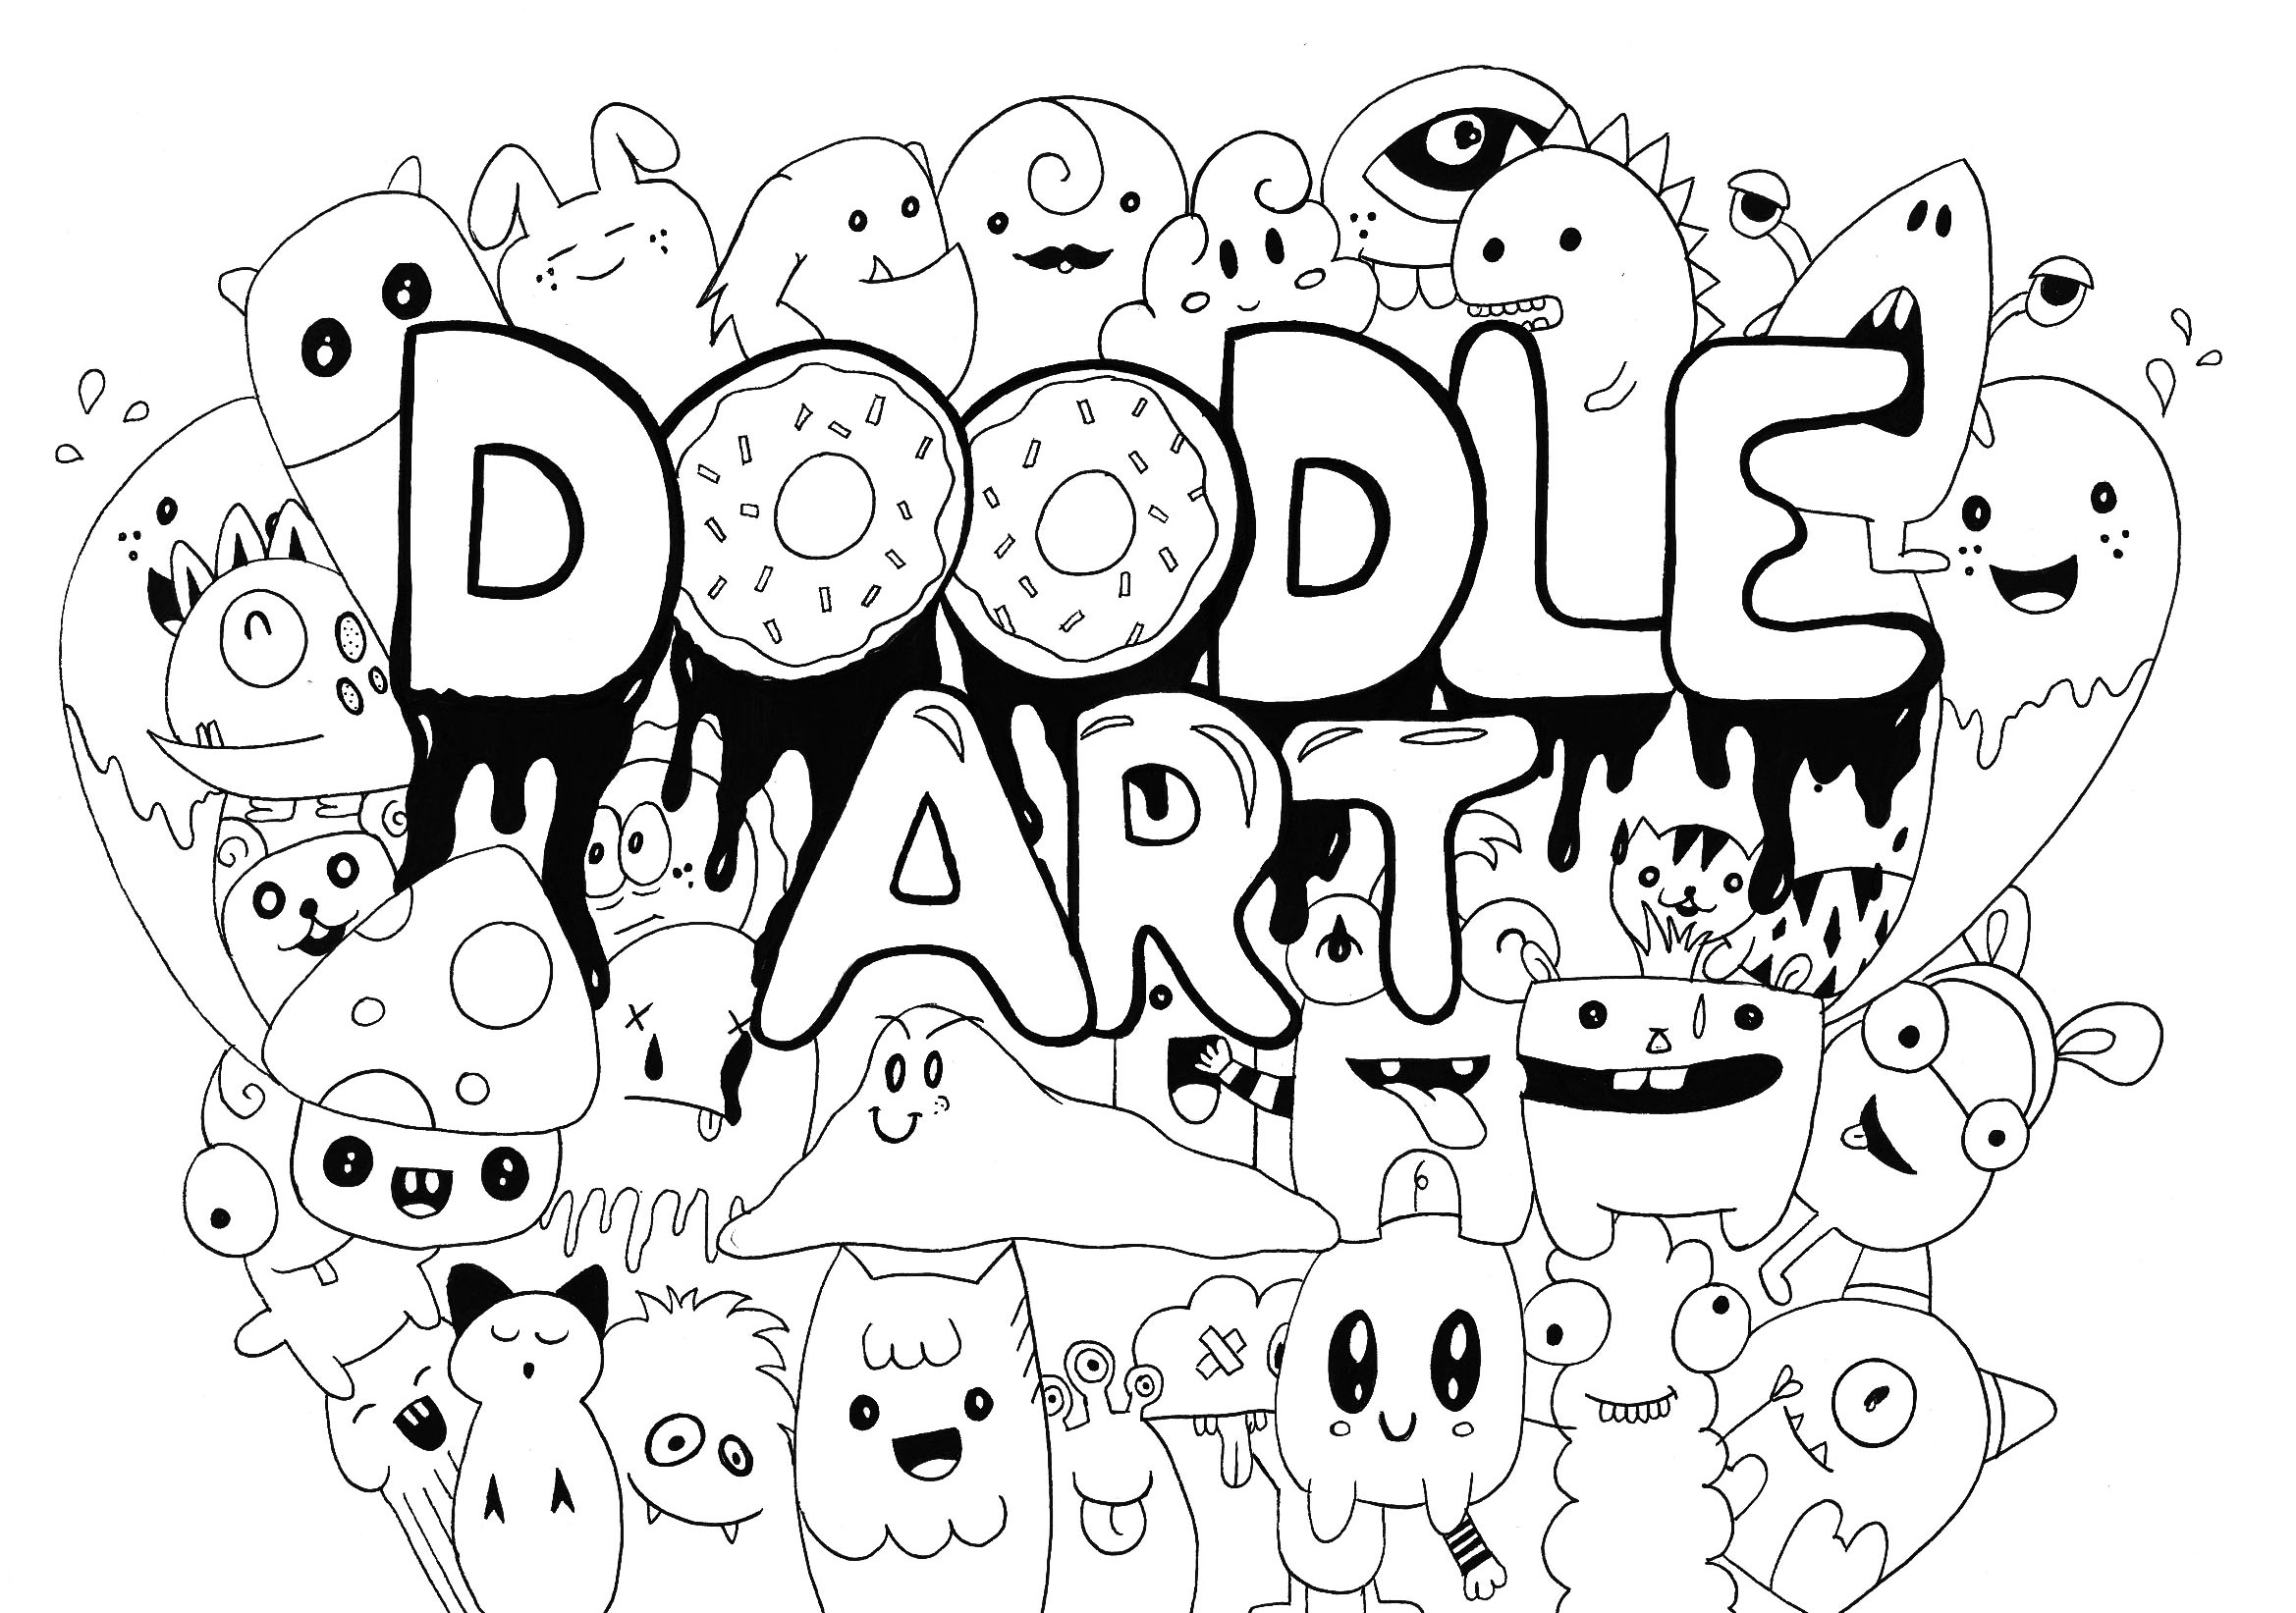 Simple Doodle Art coloring page for kids